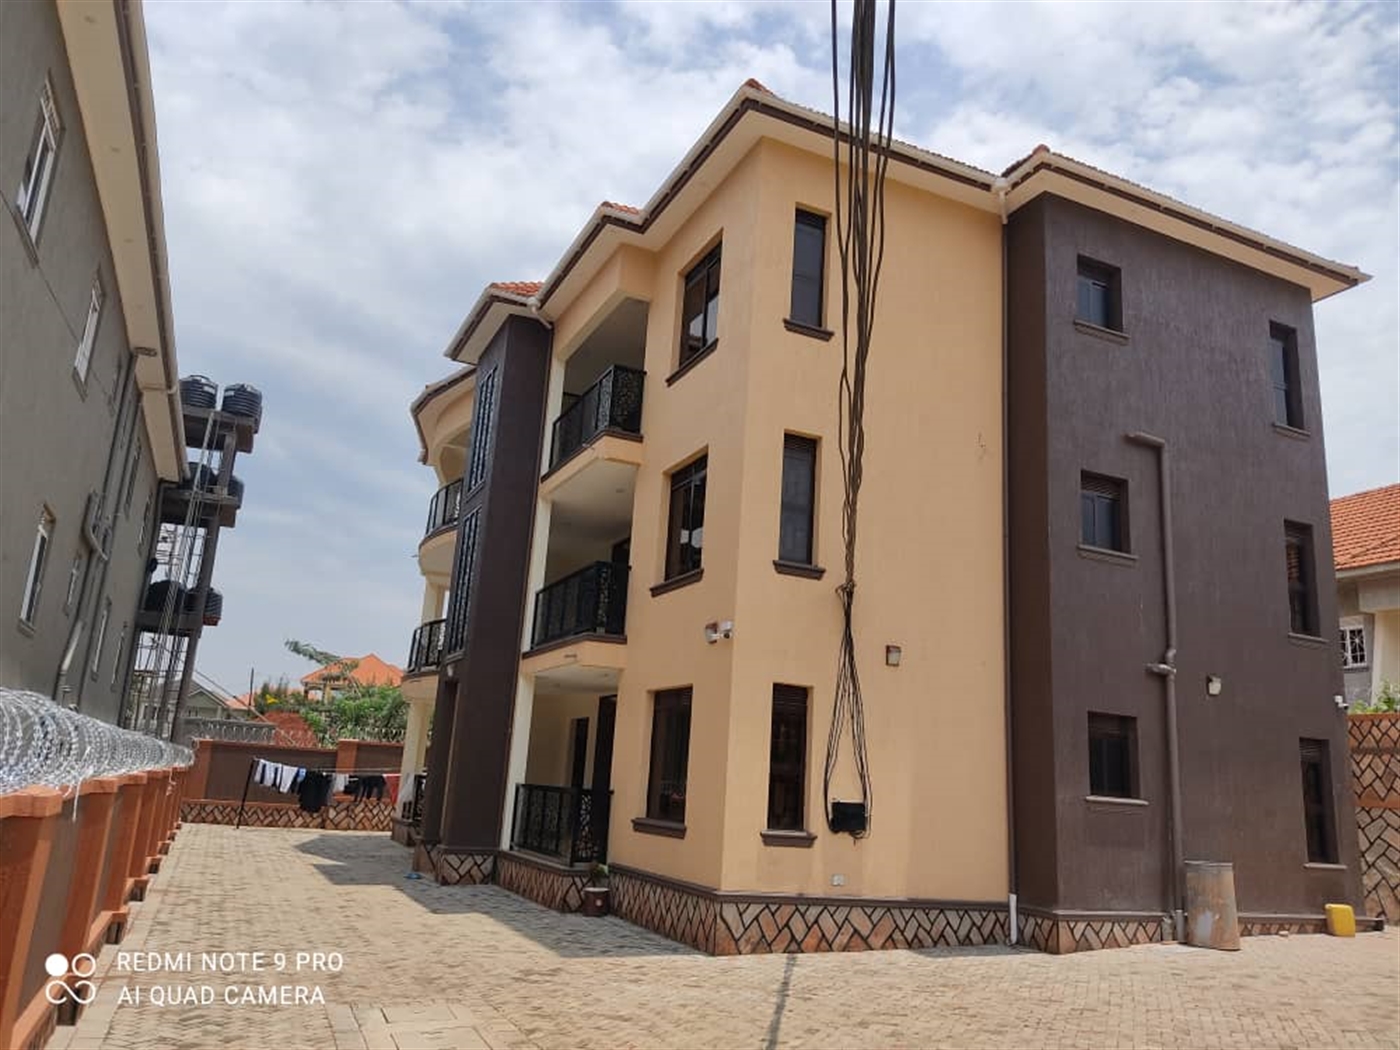 Apartment block for sale in Kisaasi Wakiso